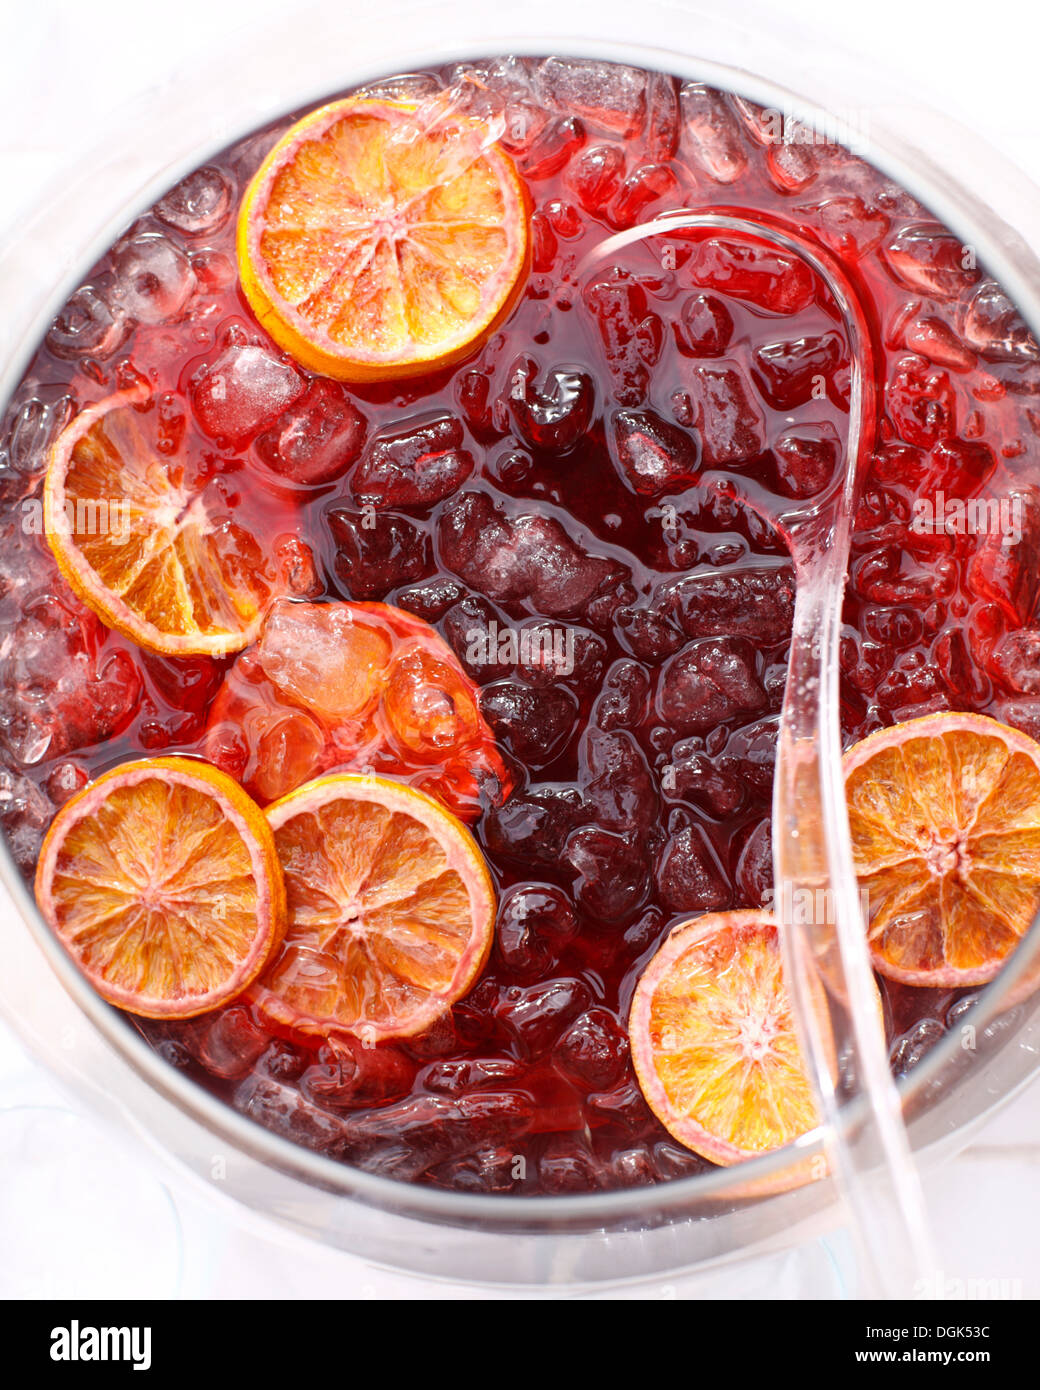 Punch bowl with iced mulled wine Stock Photo